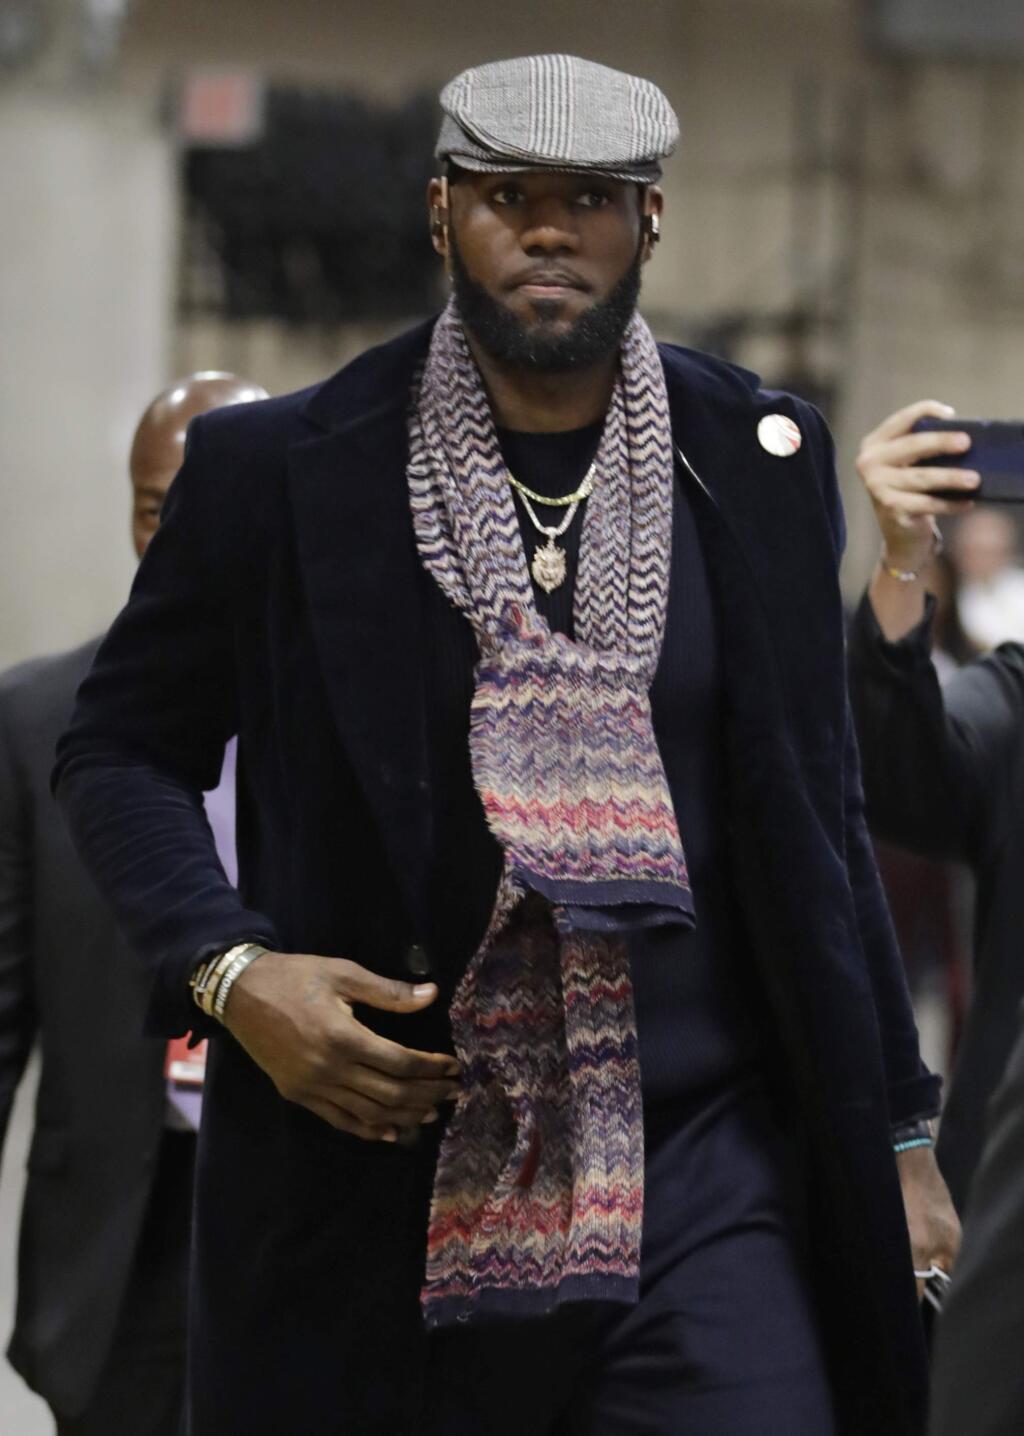 Los Angeles Lakers' LeBron James enters the arena before an NBA basketball game against the Cleveland Cavaliers, Wednesday, Nov. 21, 2018, in Cleveland. (AP Photo/Tony Dejak)